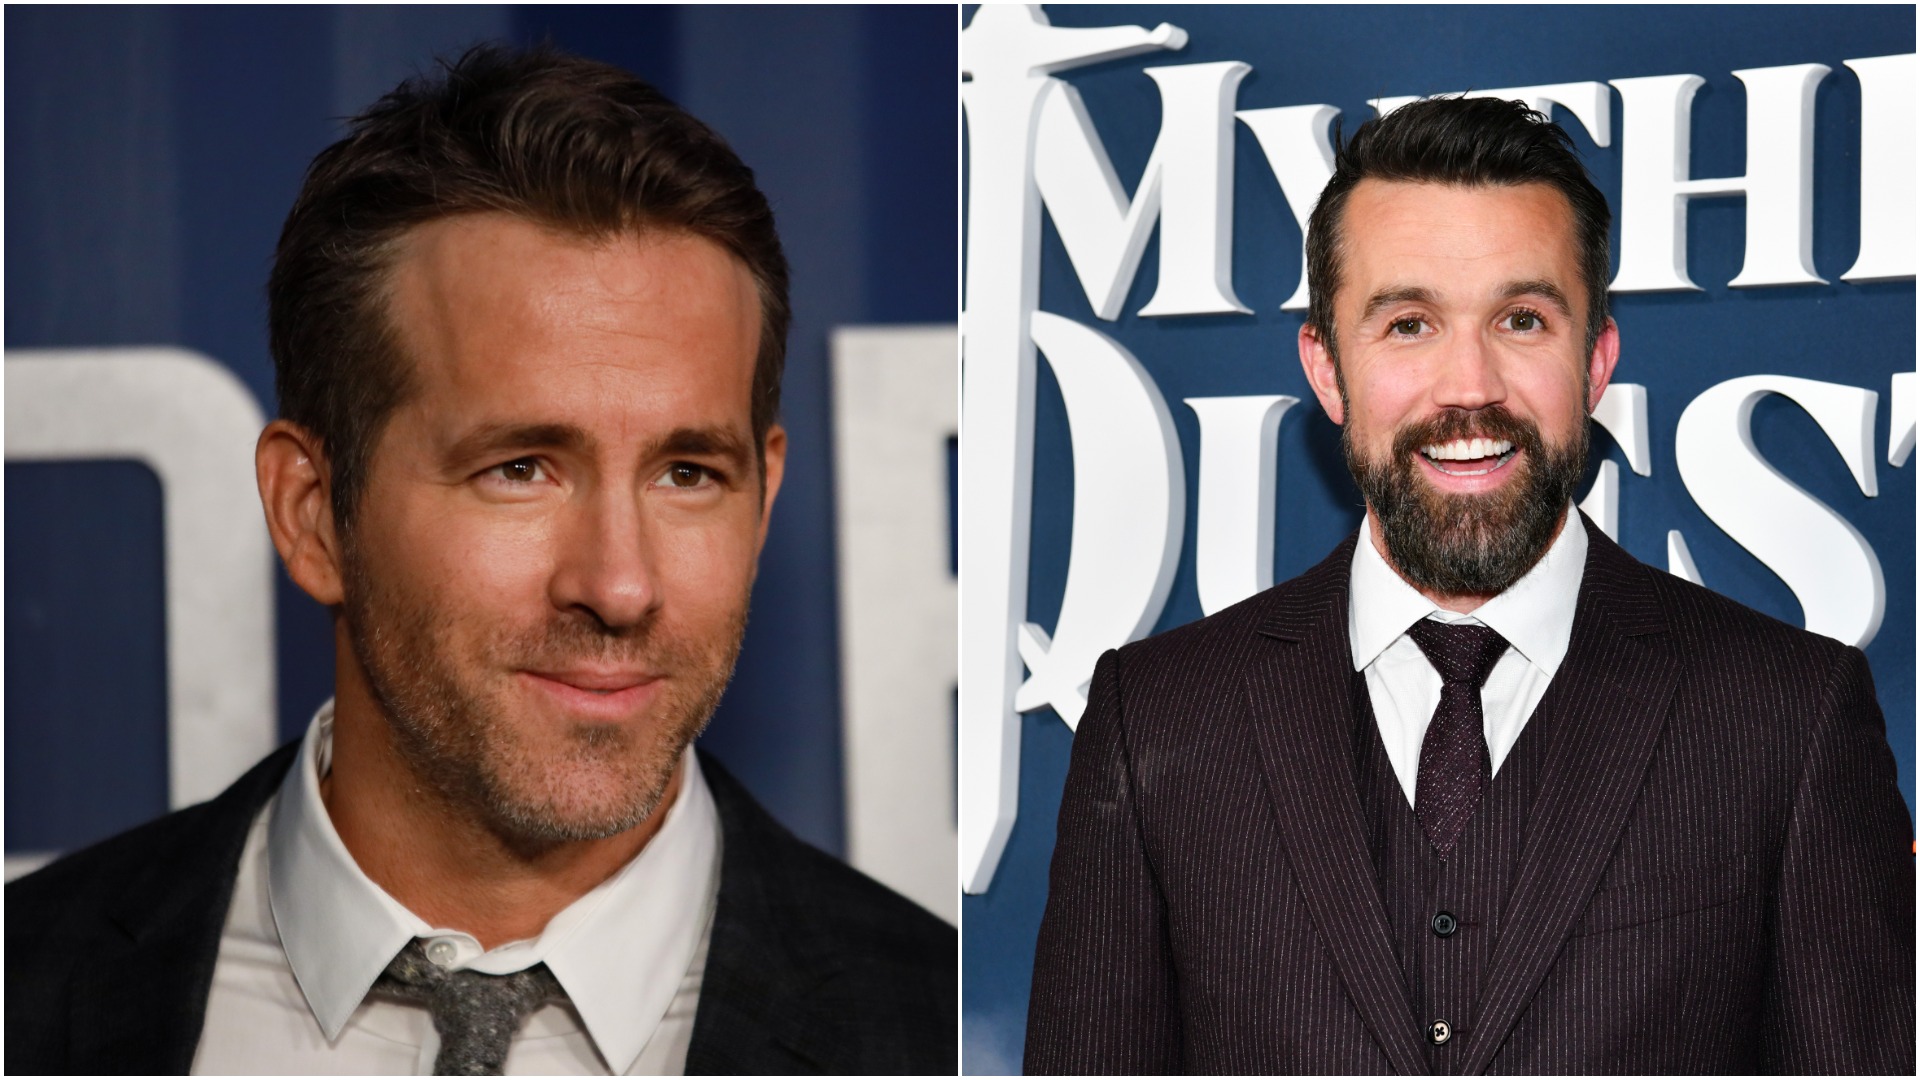 Wrexham could be going all Hollywood after it was announced Ryan Reynolds and Rob McElhenney are trying to take over the club.